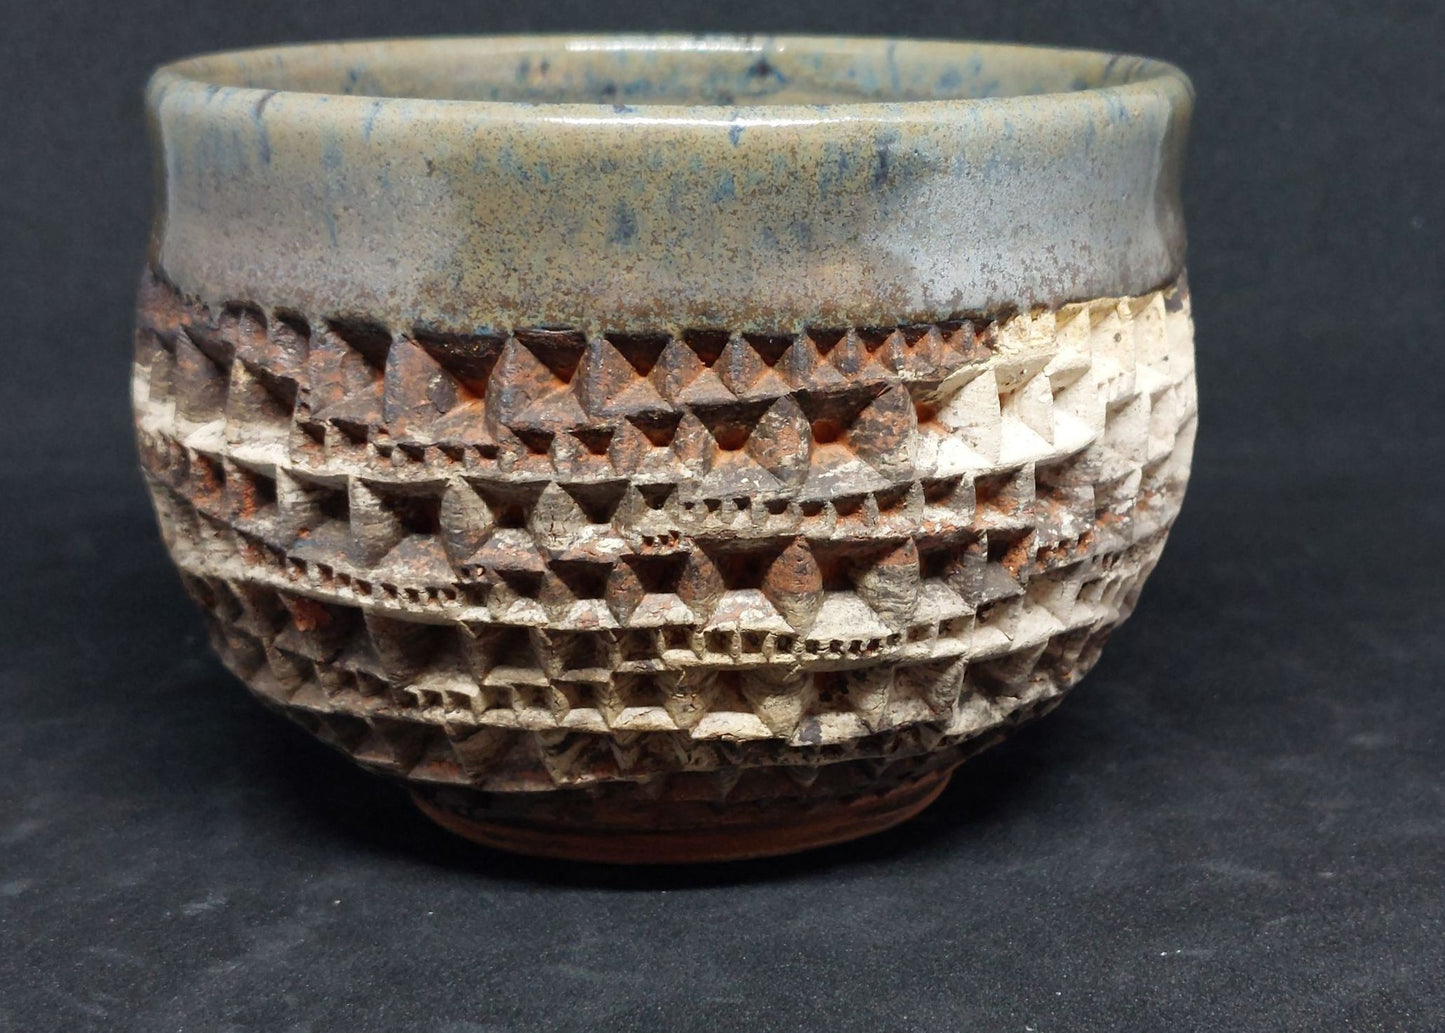 Black bowl on mixed clays - Babel pattern